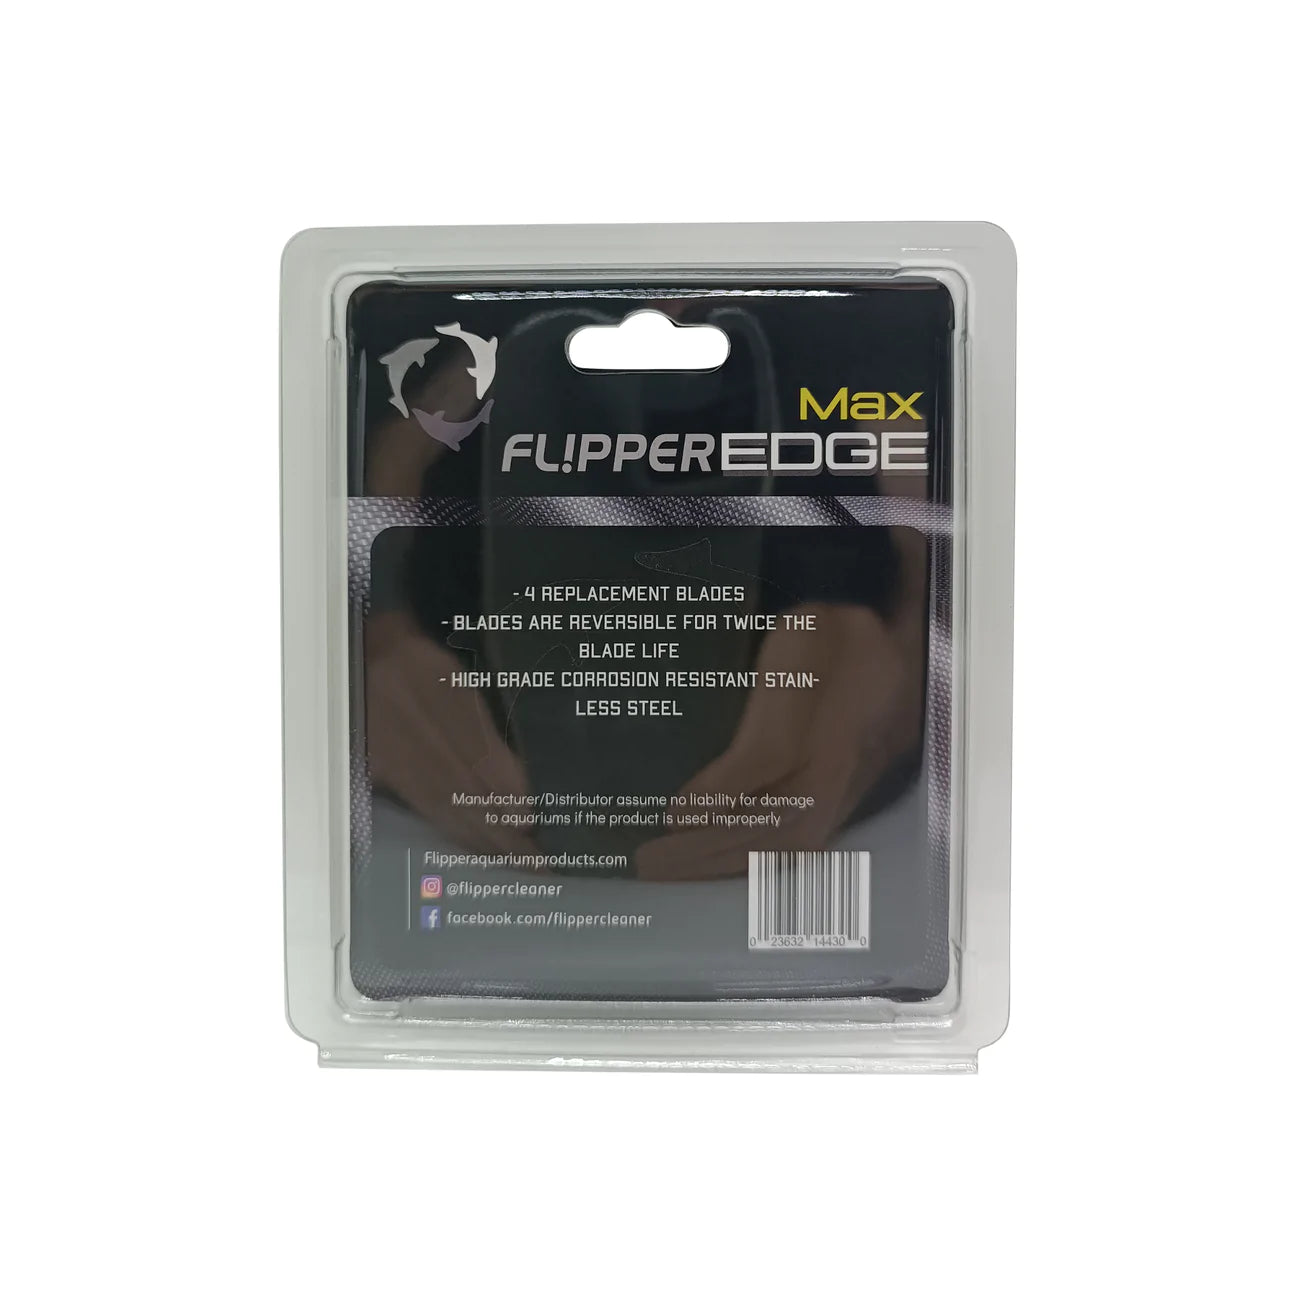 Edge MAX Stainless Steel Blades - 4pk- MAP $19.99